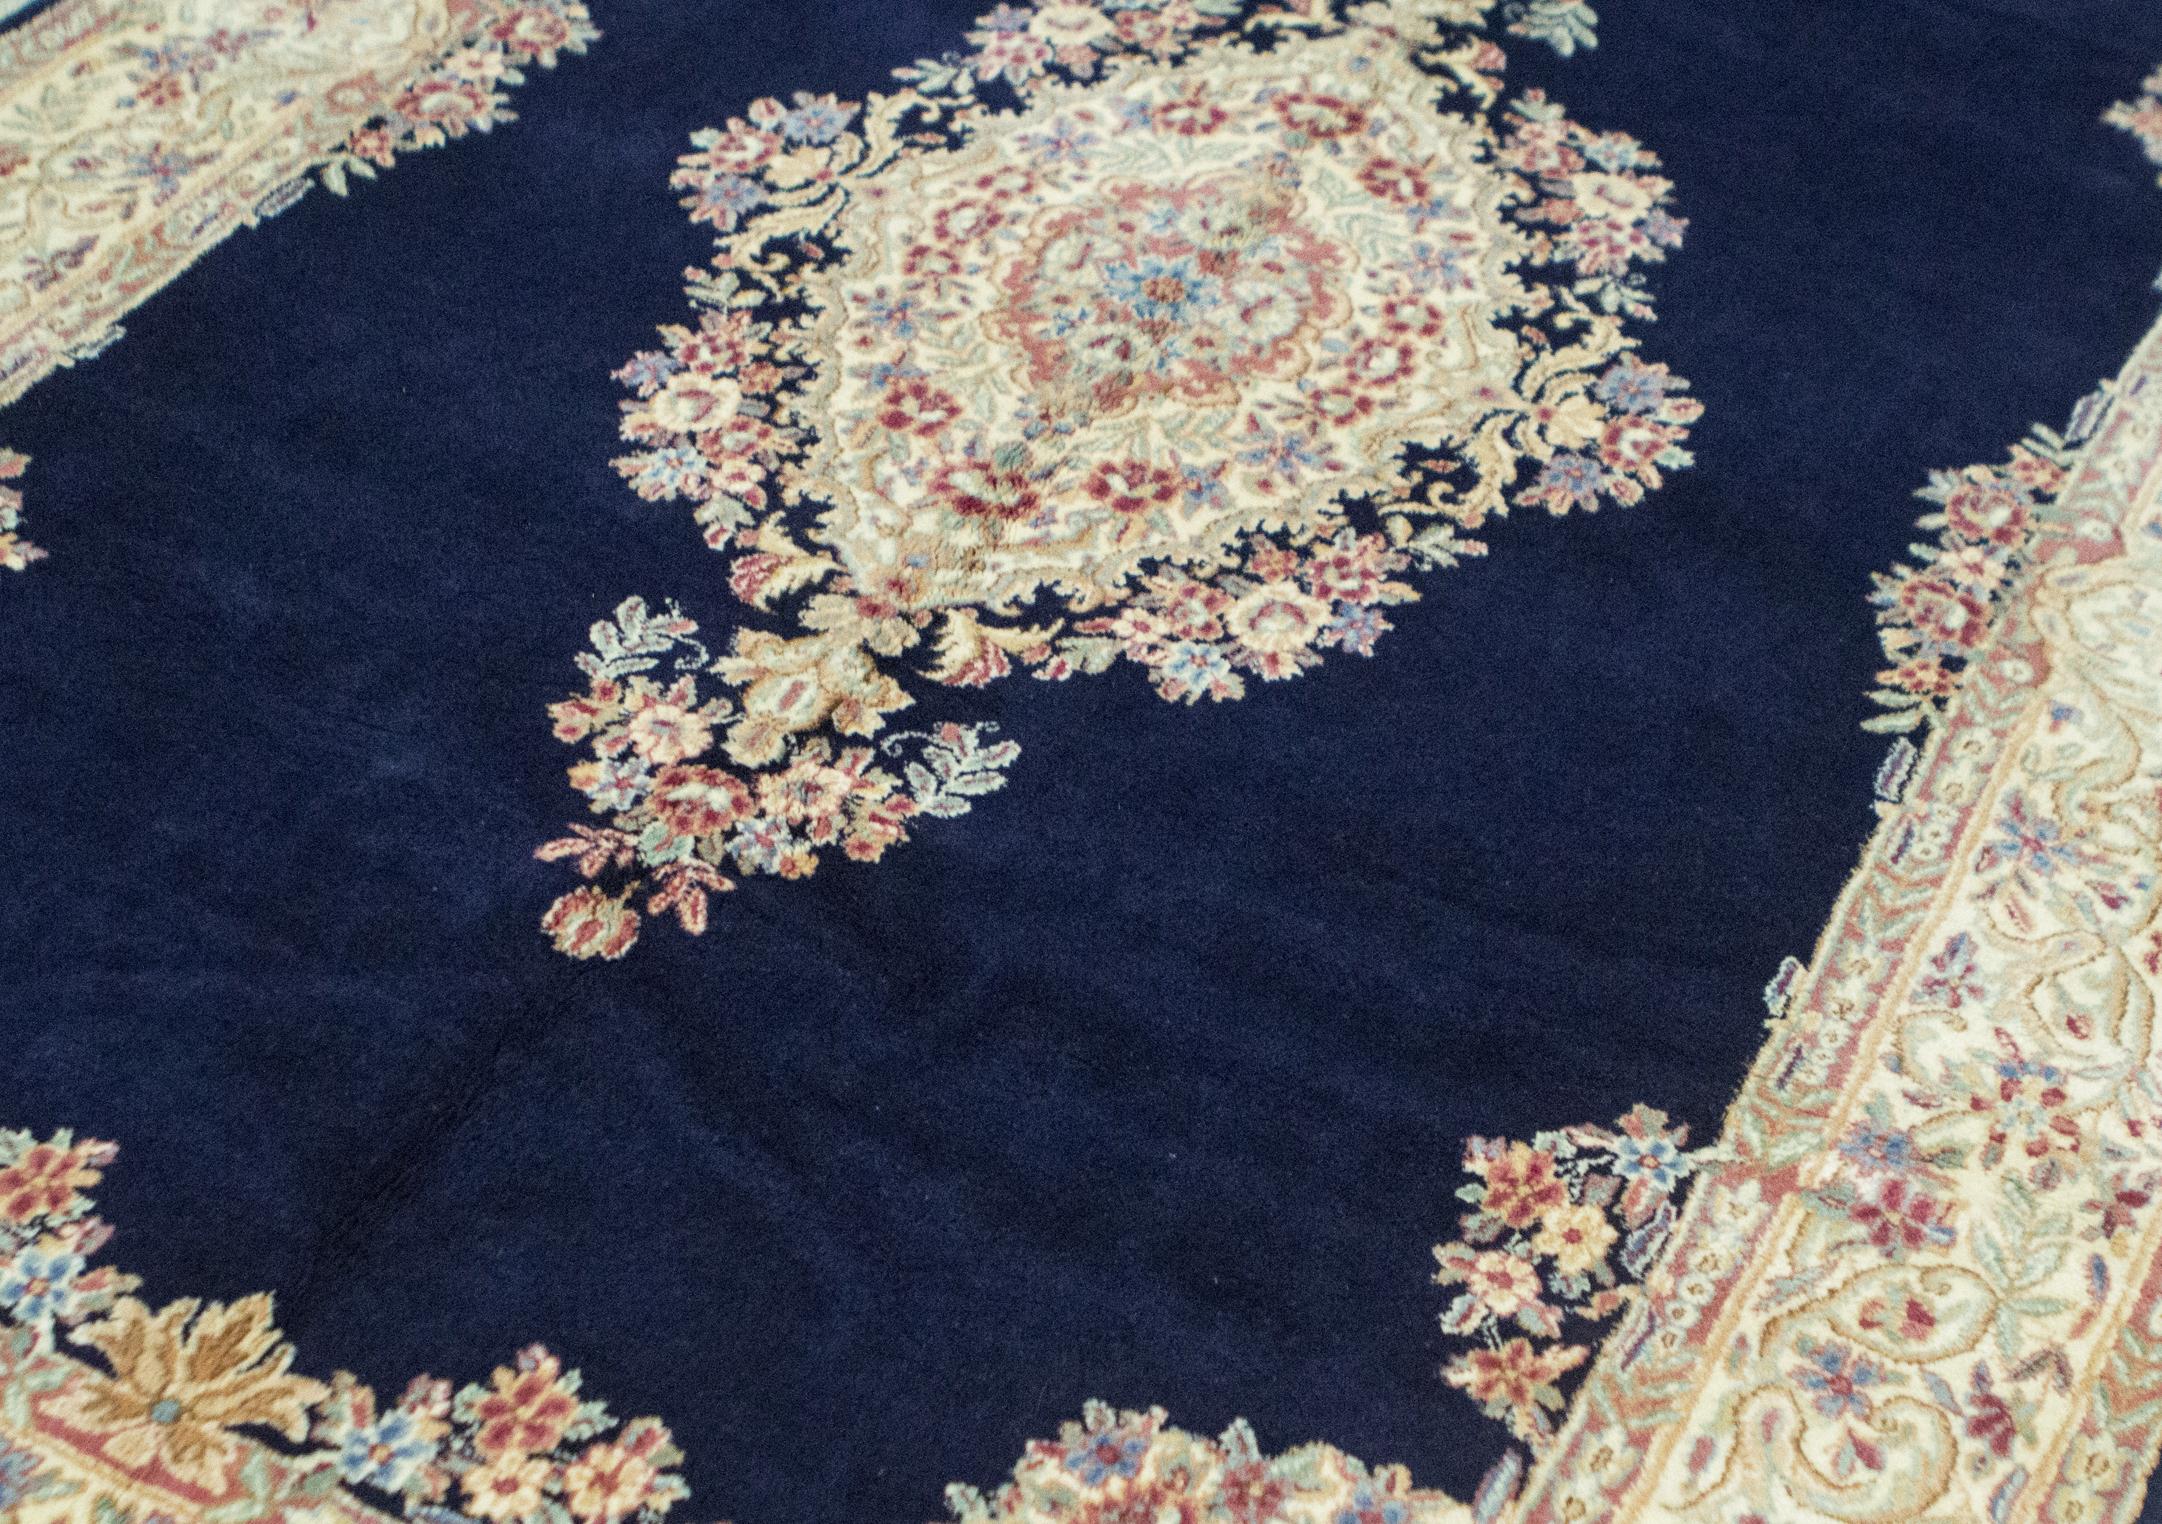 Vintage Persian Kerman rug circa 1940. On a wonderful deep blue ground sits a medallion filled with detailed designs of summer flowers which is repeated in the main border to give this rug a sense of strength mixed with the softness of the floral